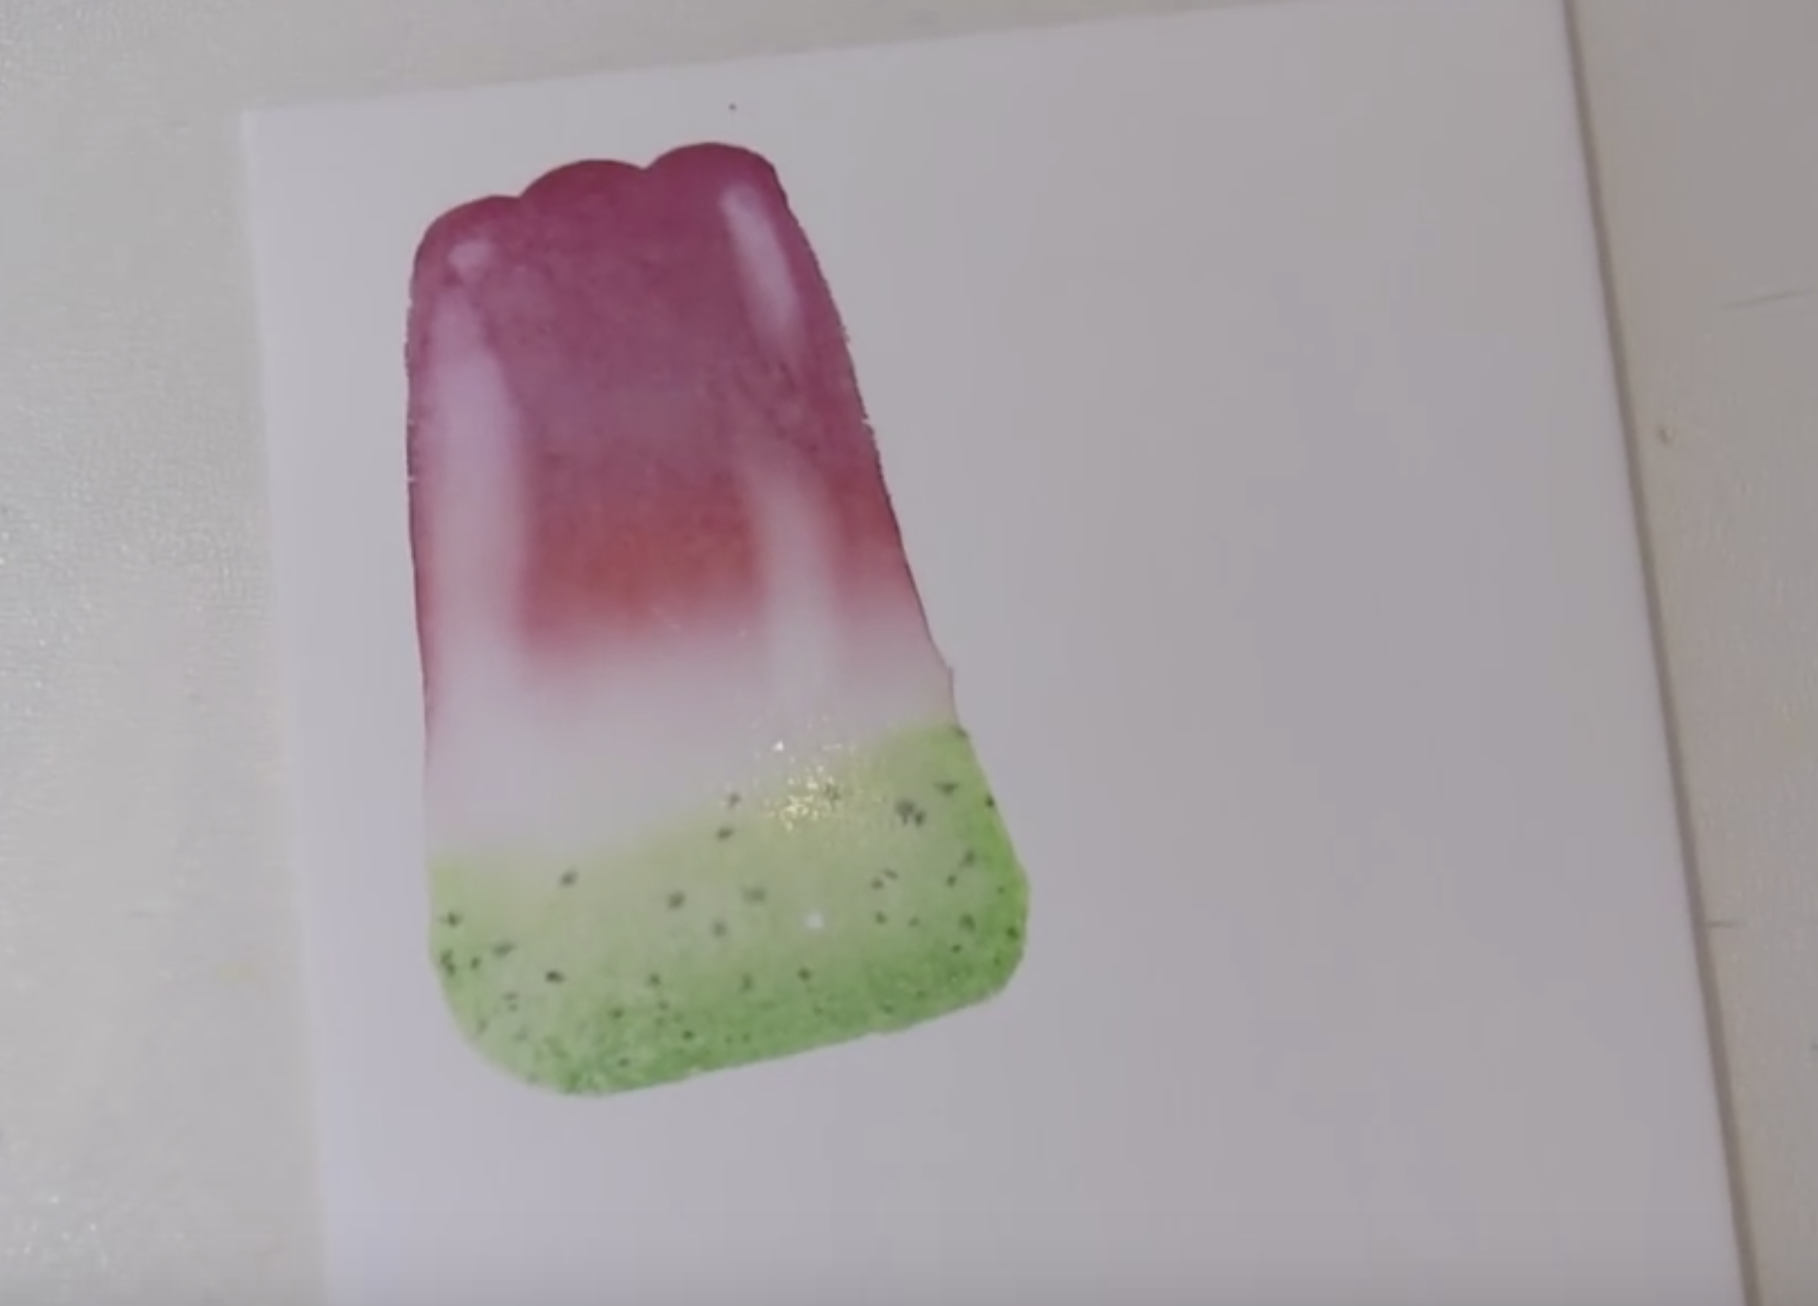 easy-watercolor-ideas-techniques-how-to-paint-a-watercolor-popsicle - Step 5